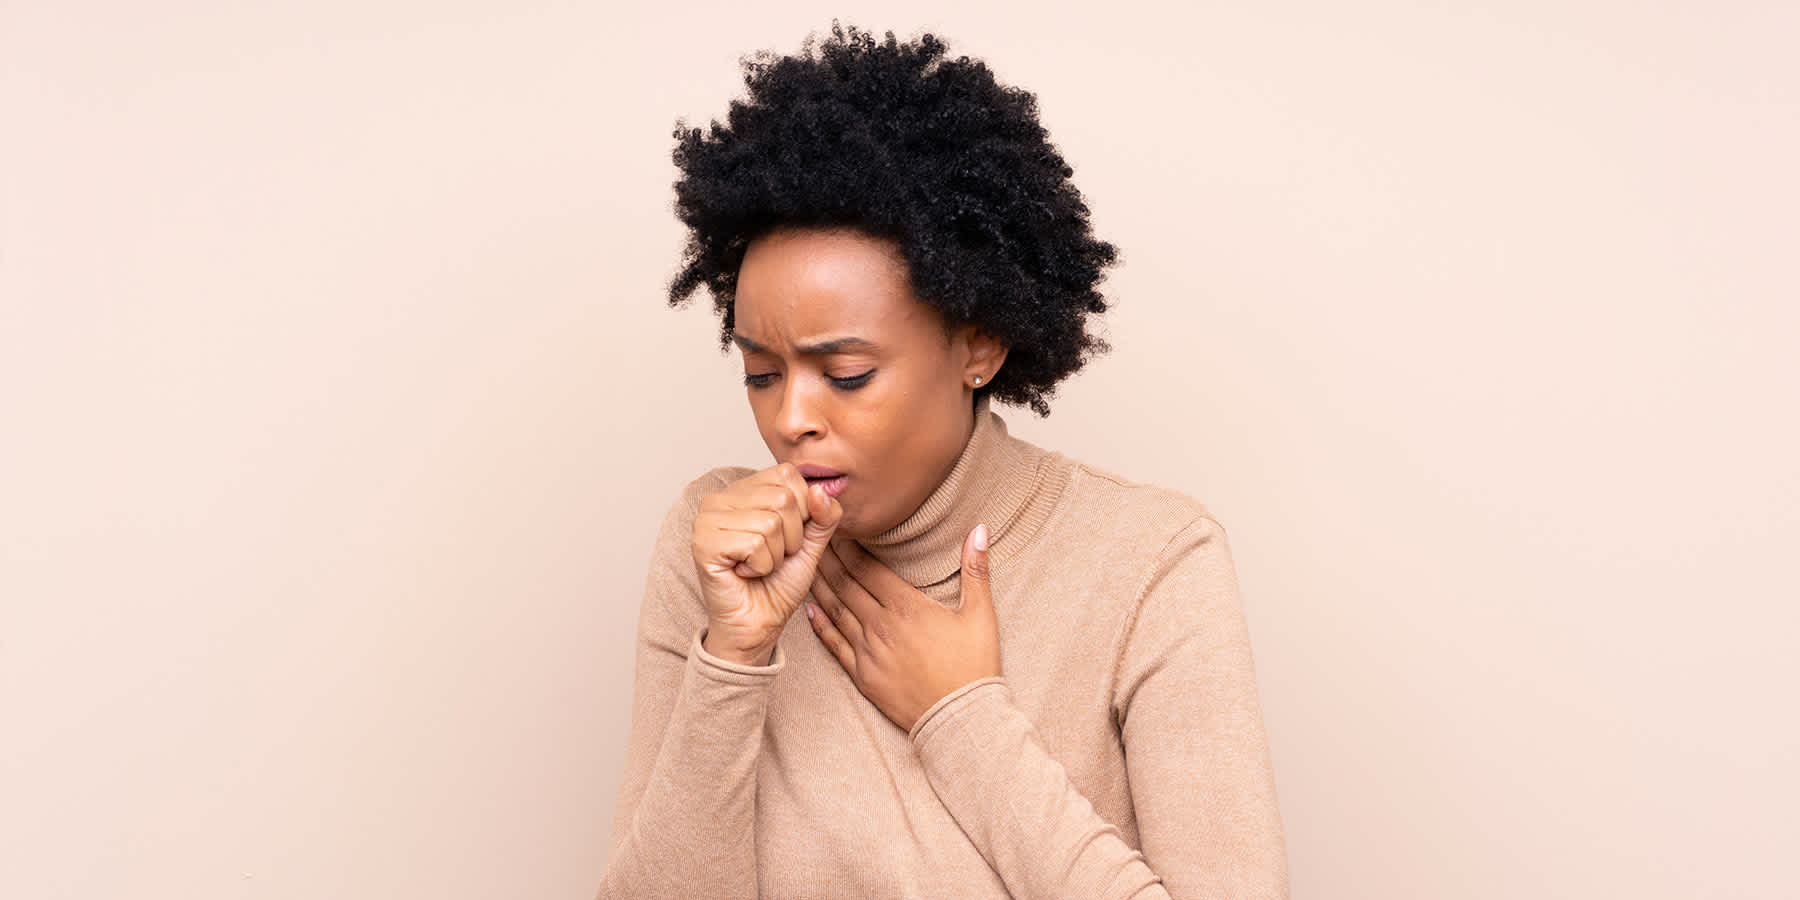 Woman experiencing flu symptoms after catching the flu